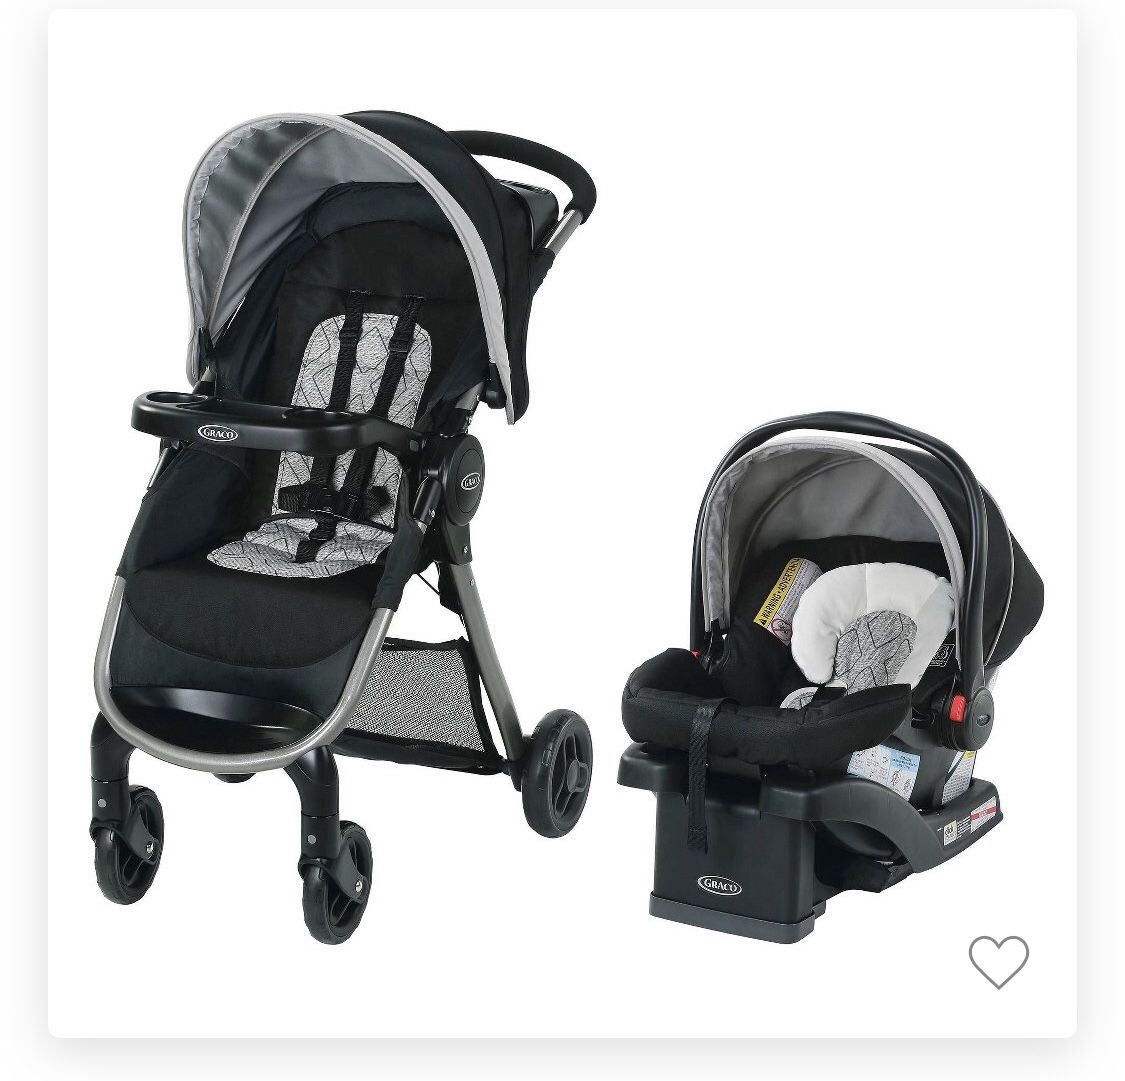 Graco Fast Action SE Travel System stroller and car seat